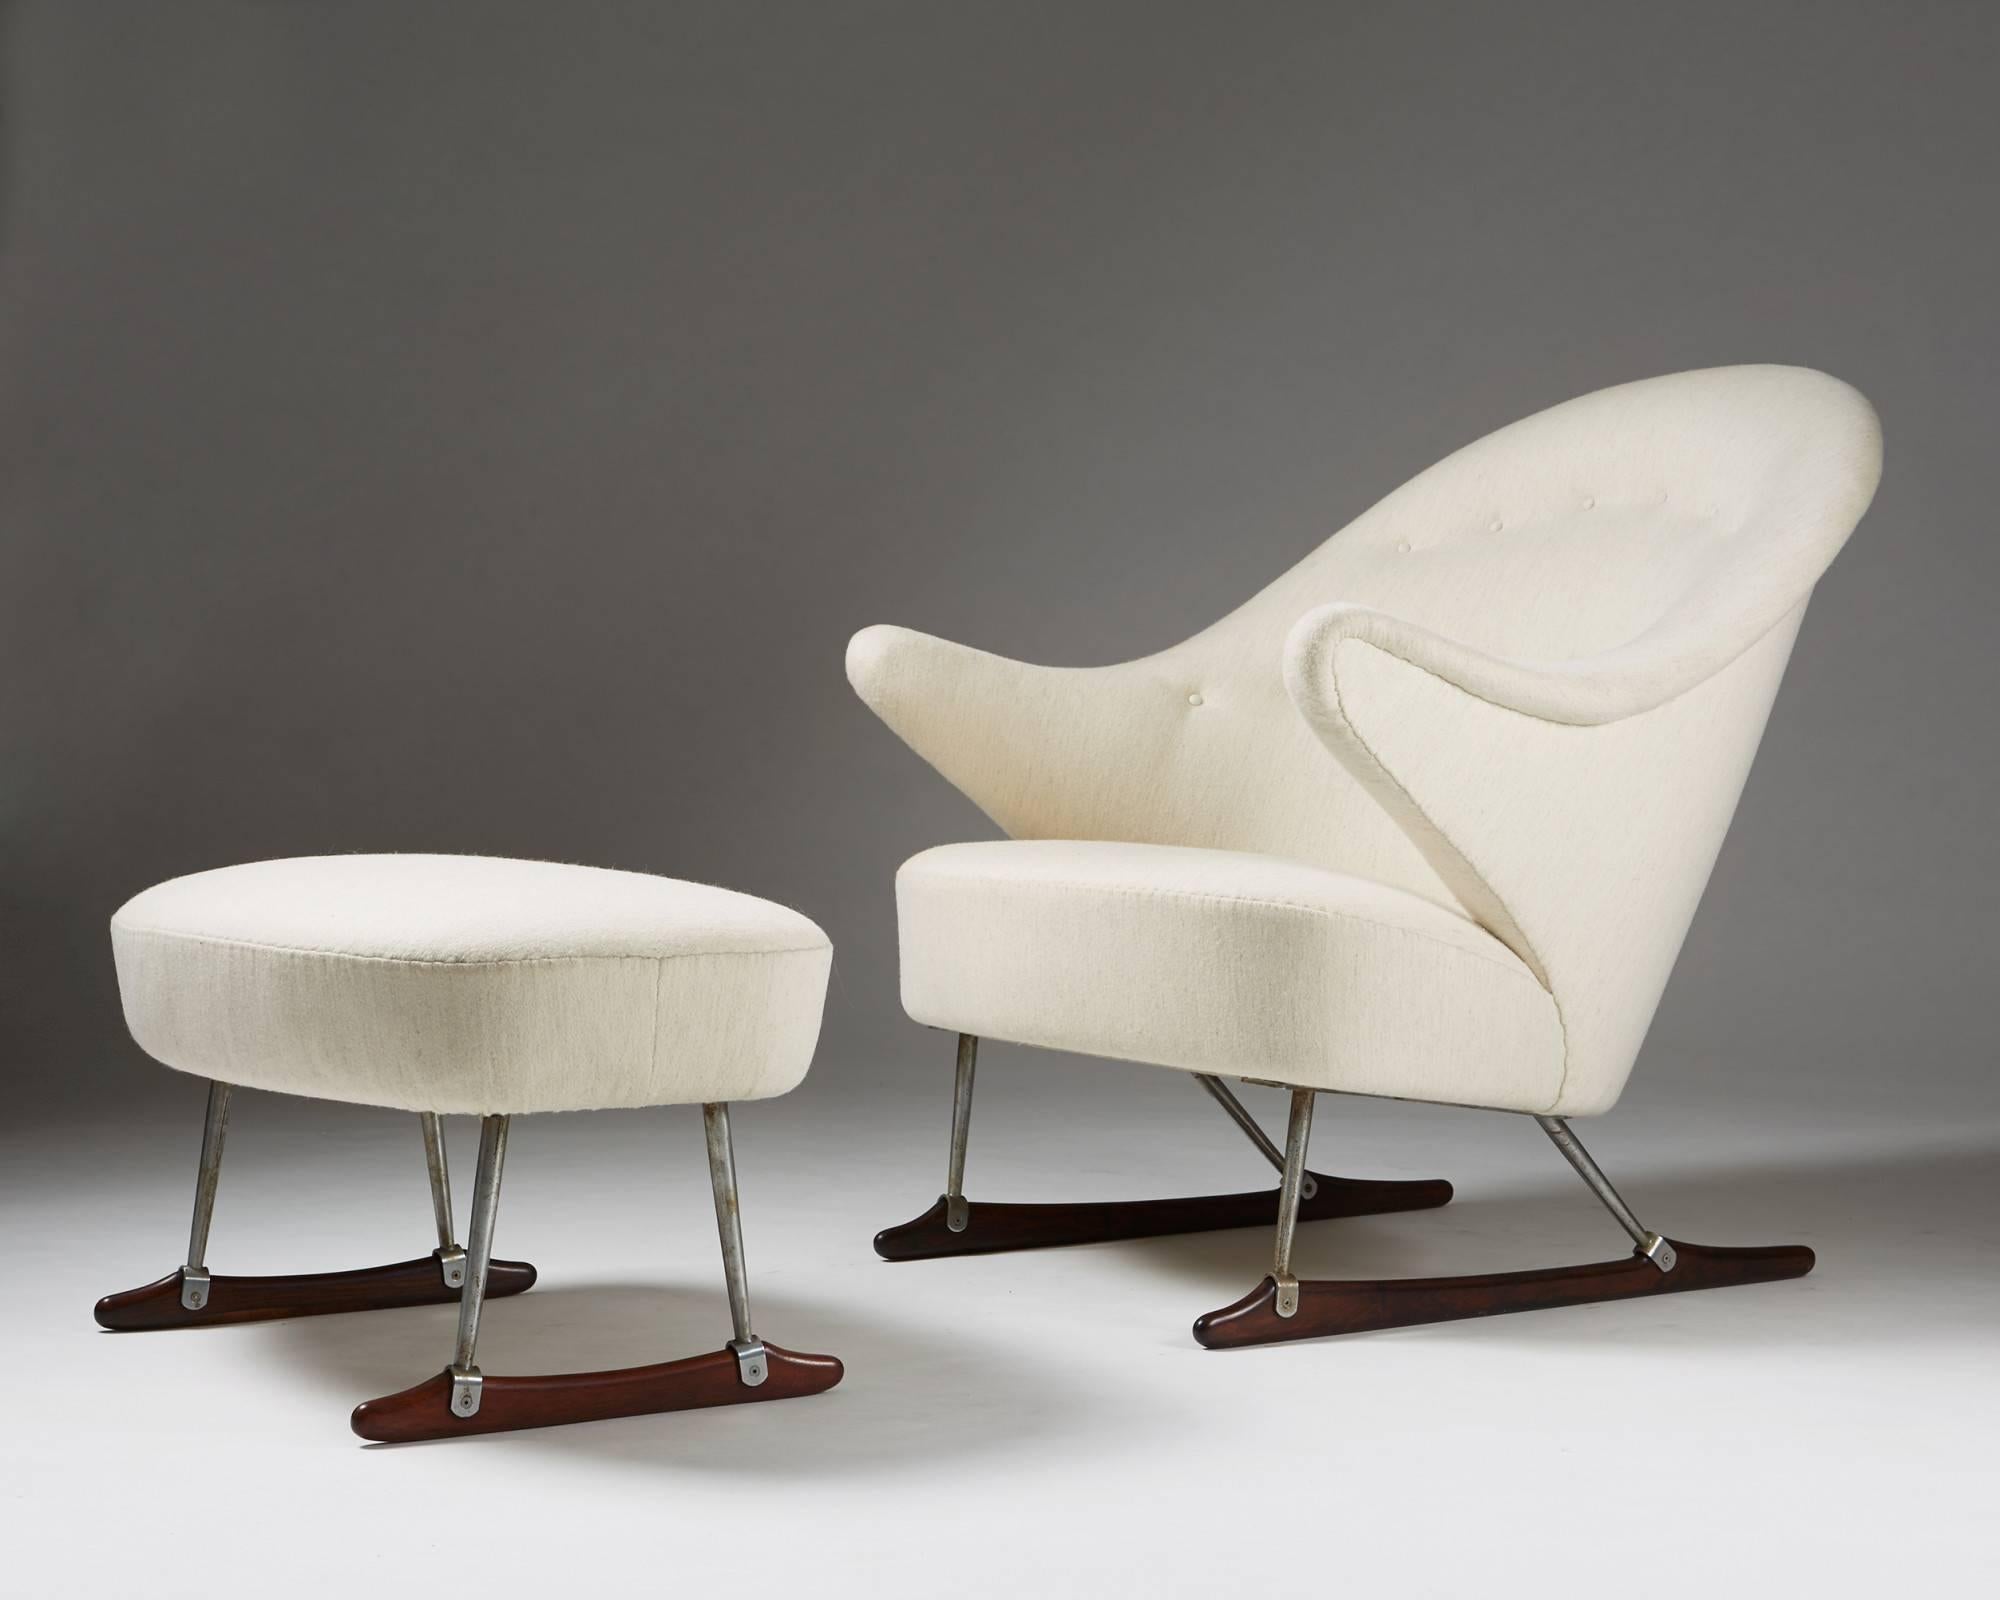 Sleigh chair designed by Börge Mogensen for Tage M Christensen & Co,
Denmark. 1953.

Wool upholstery, steel legs and Brazilian rosewood runners.

Armchair:
H: 82 cm/ 2' 8 1/8